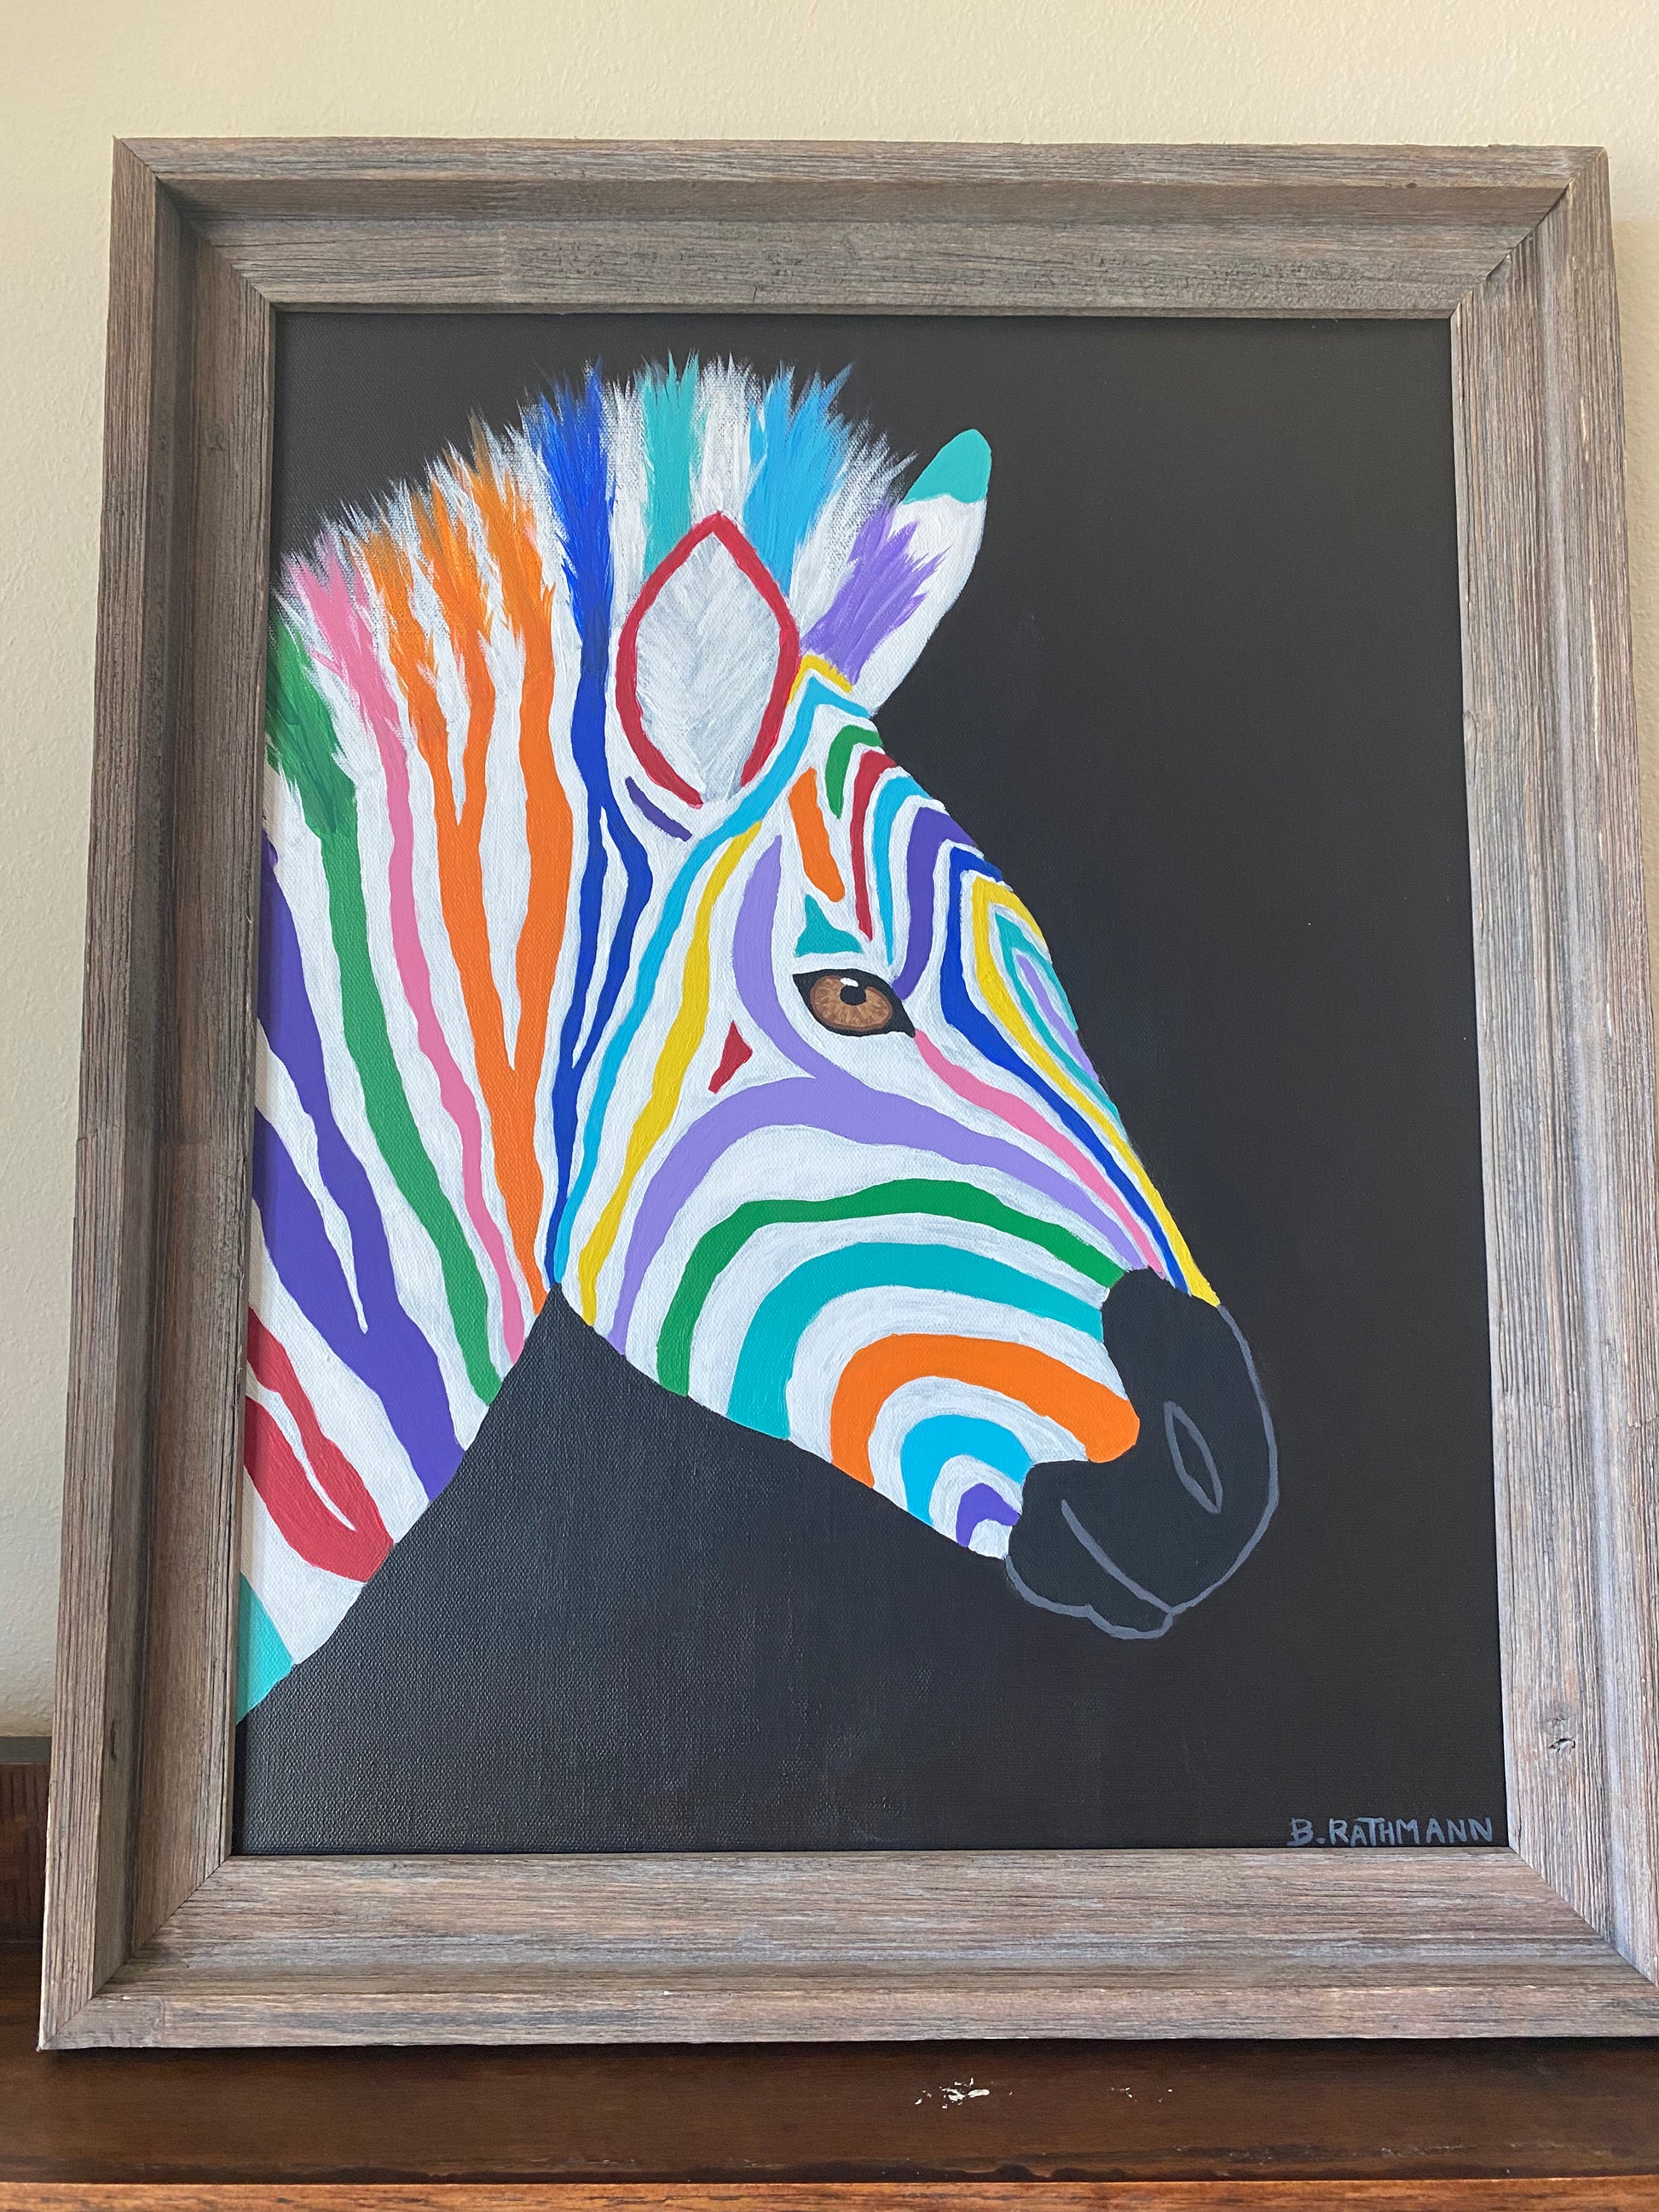 You Are the Only You Painting is a colorful rainbow zebra painting. This is an abstract rendition of a Zebra that will add a fun and bold aesthetic with your decor. This piece was featured at the 2022 ArtsQuest Festival in Sandestin, Florida. This piece includes the frame with purchase. Measurement: 16"x20"